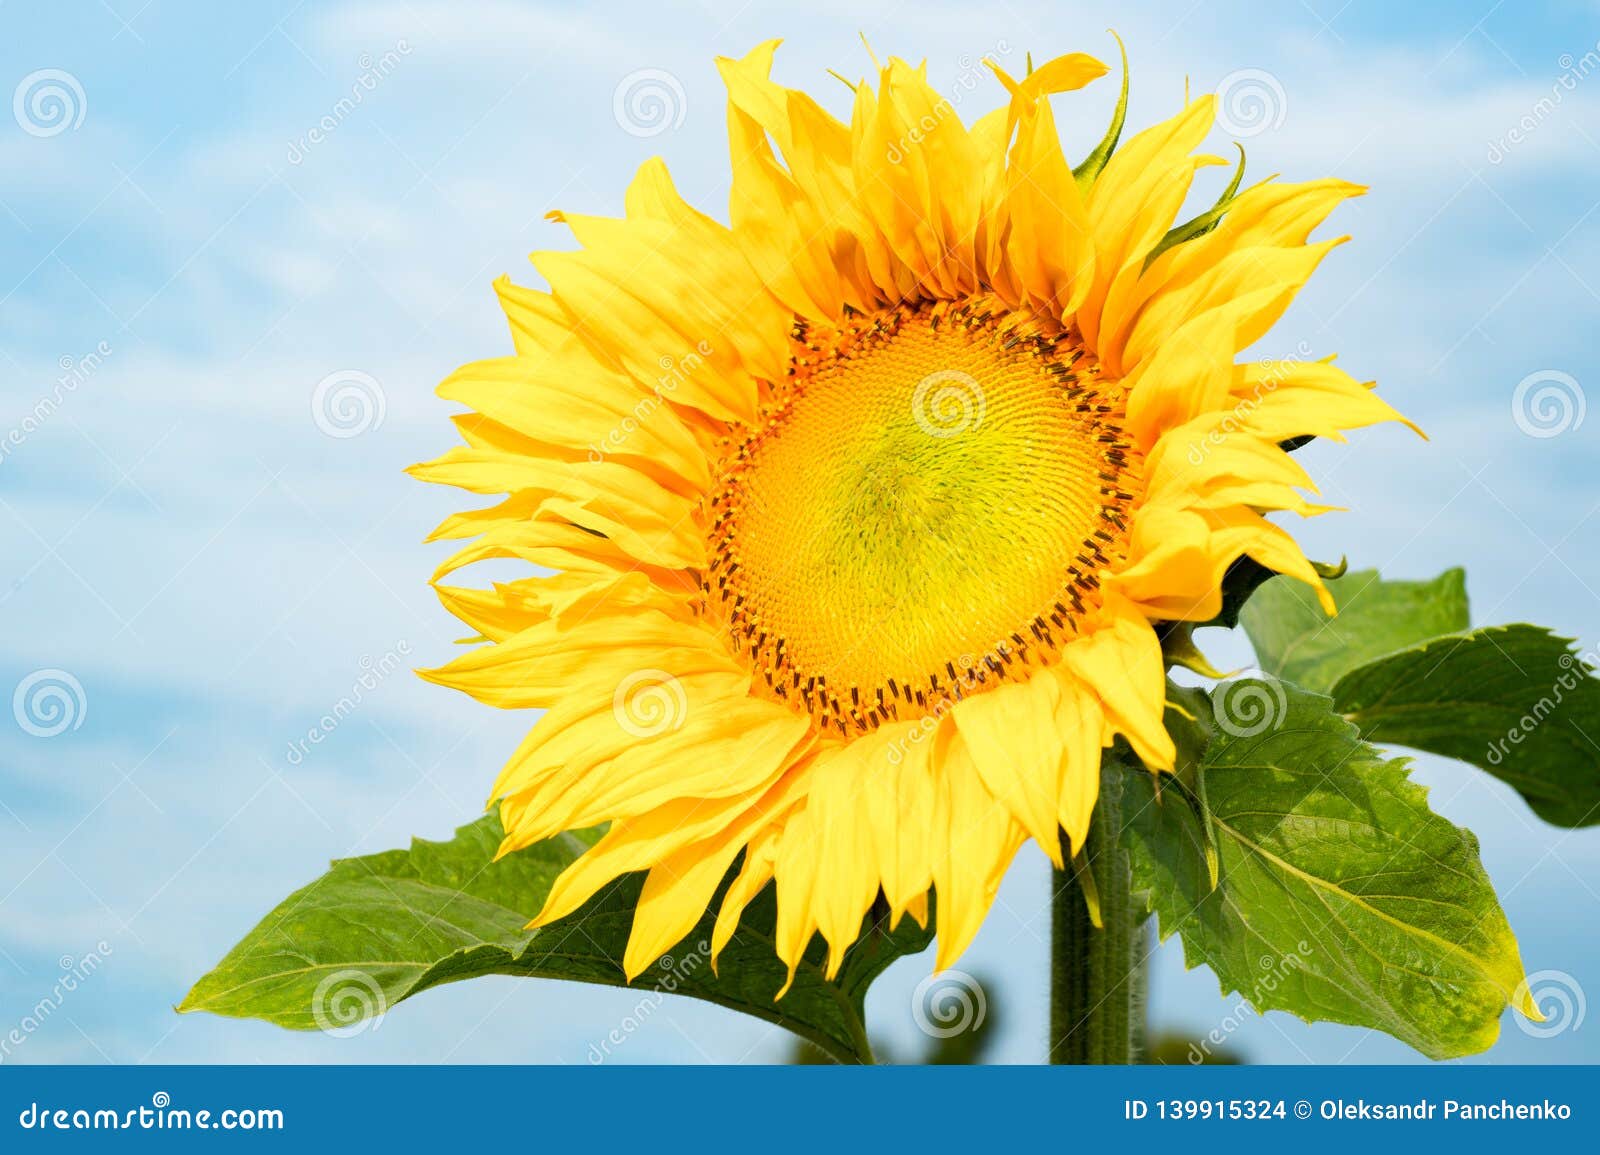 sunflower on blue sky background. sunflowers have abundant health benefits. sunflower oil improves skin health and promote cell